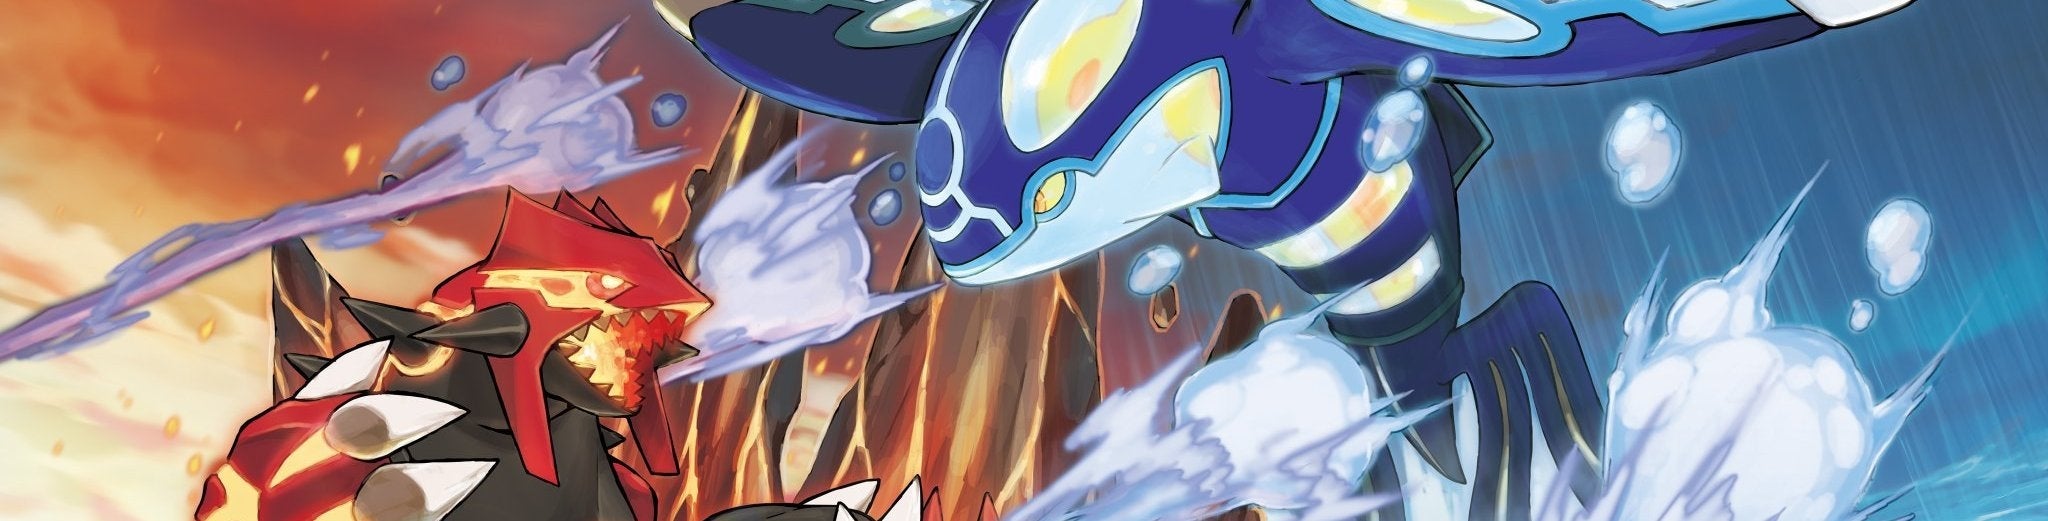 Image for Pokémon Omega Ruby and Alpha Sapphire review